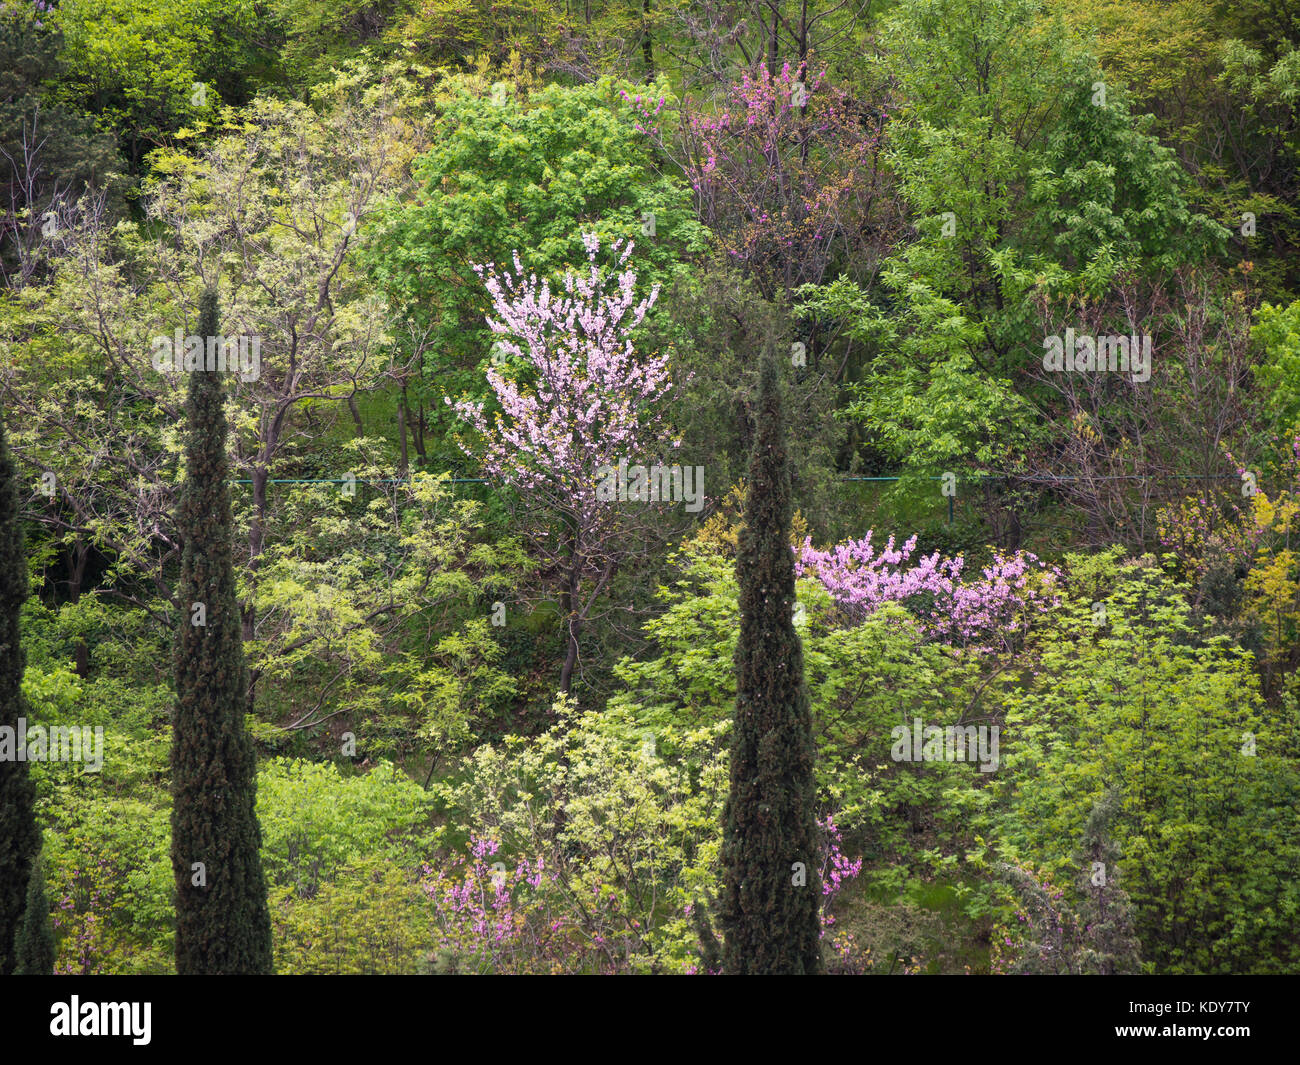 High angle view of the Botanical garden in Tbilisi Georgia, springtime greens speckled with flowering trees Stock Photo